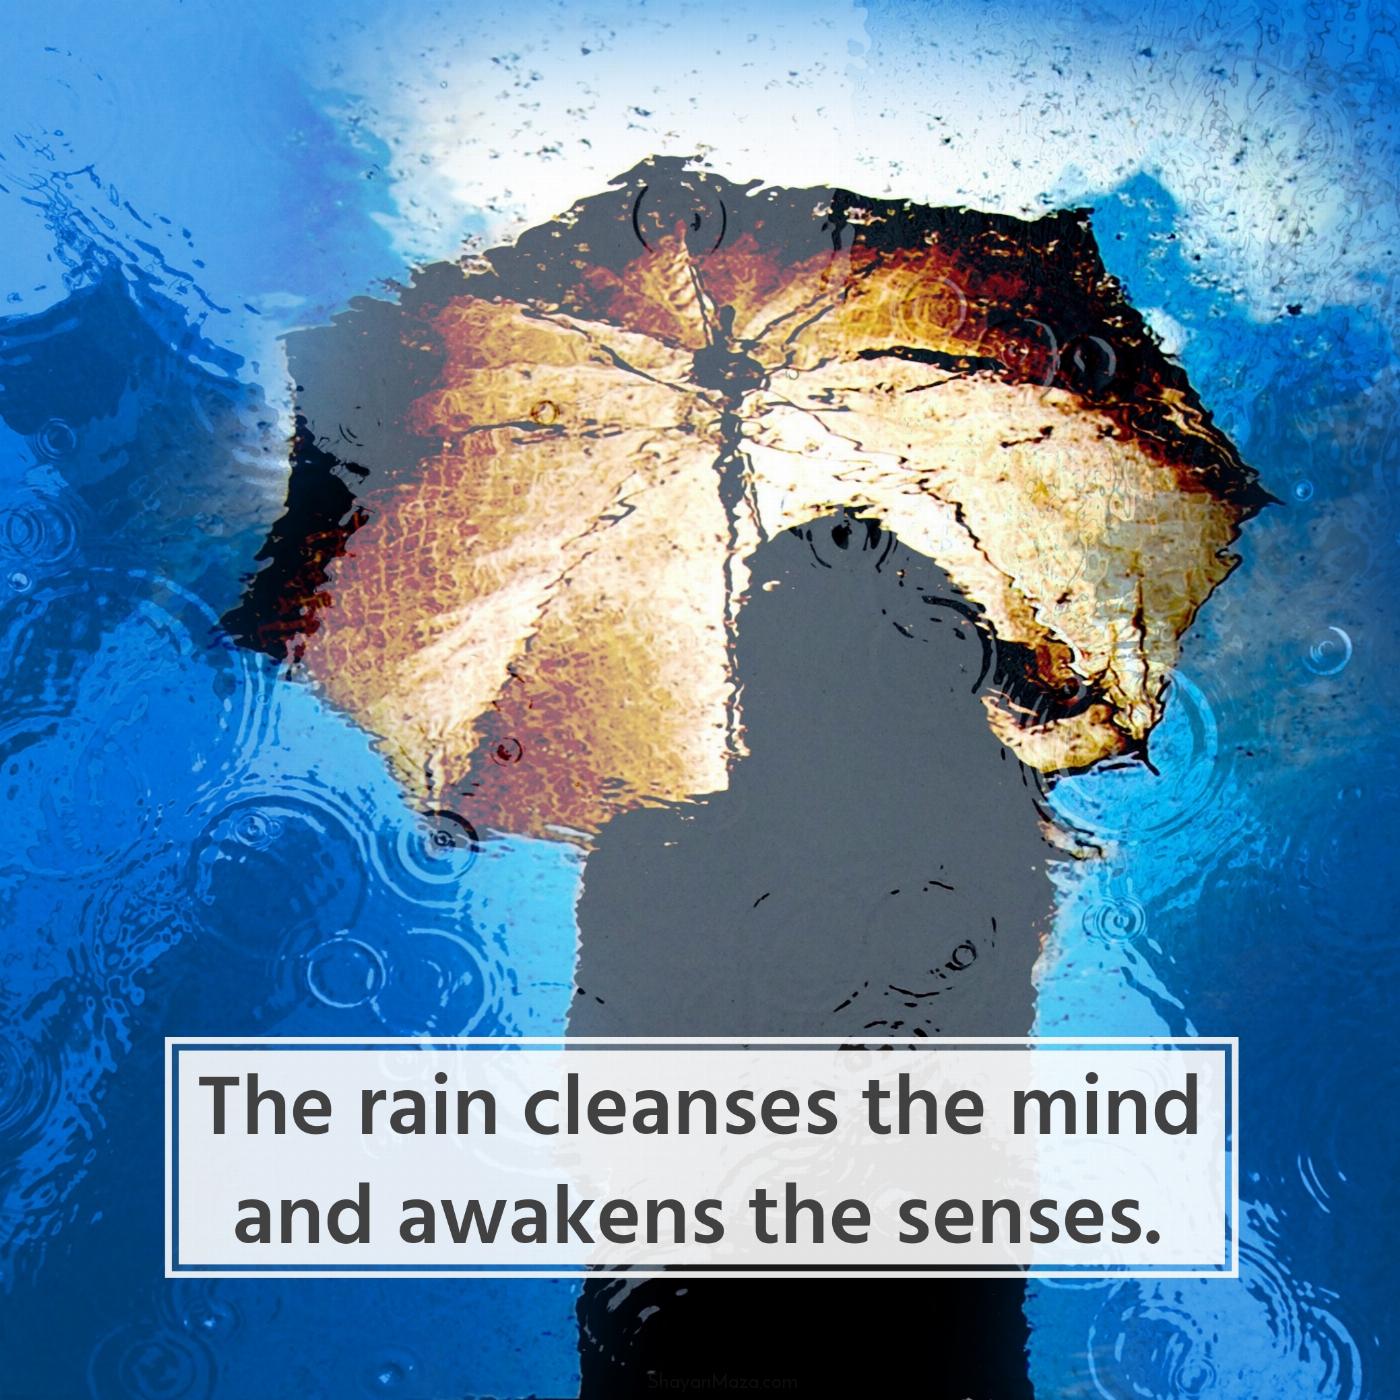 The rain cleanses the mind and awakens the senses